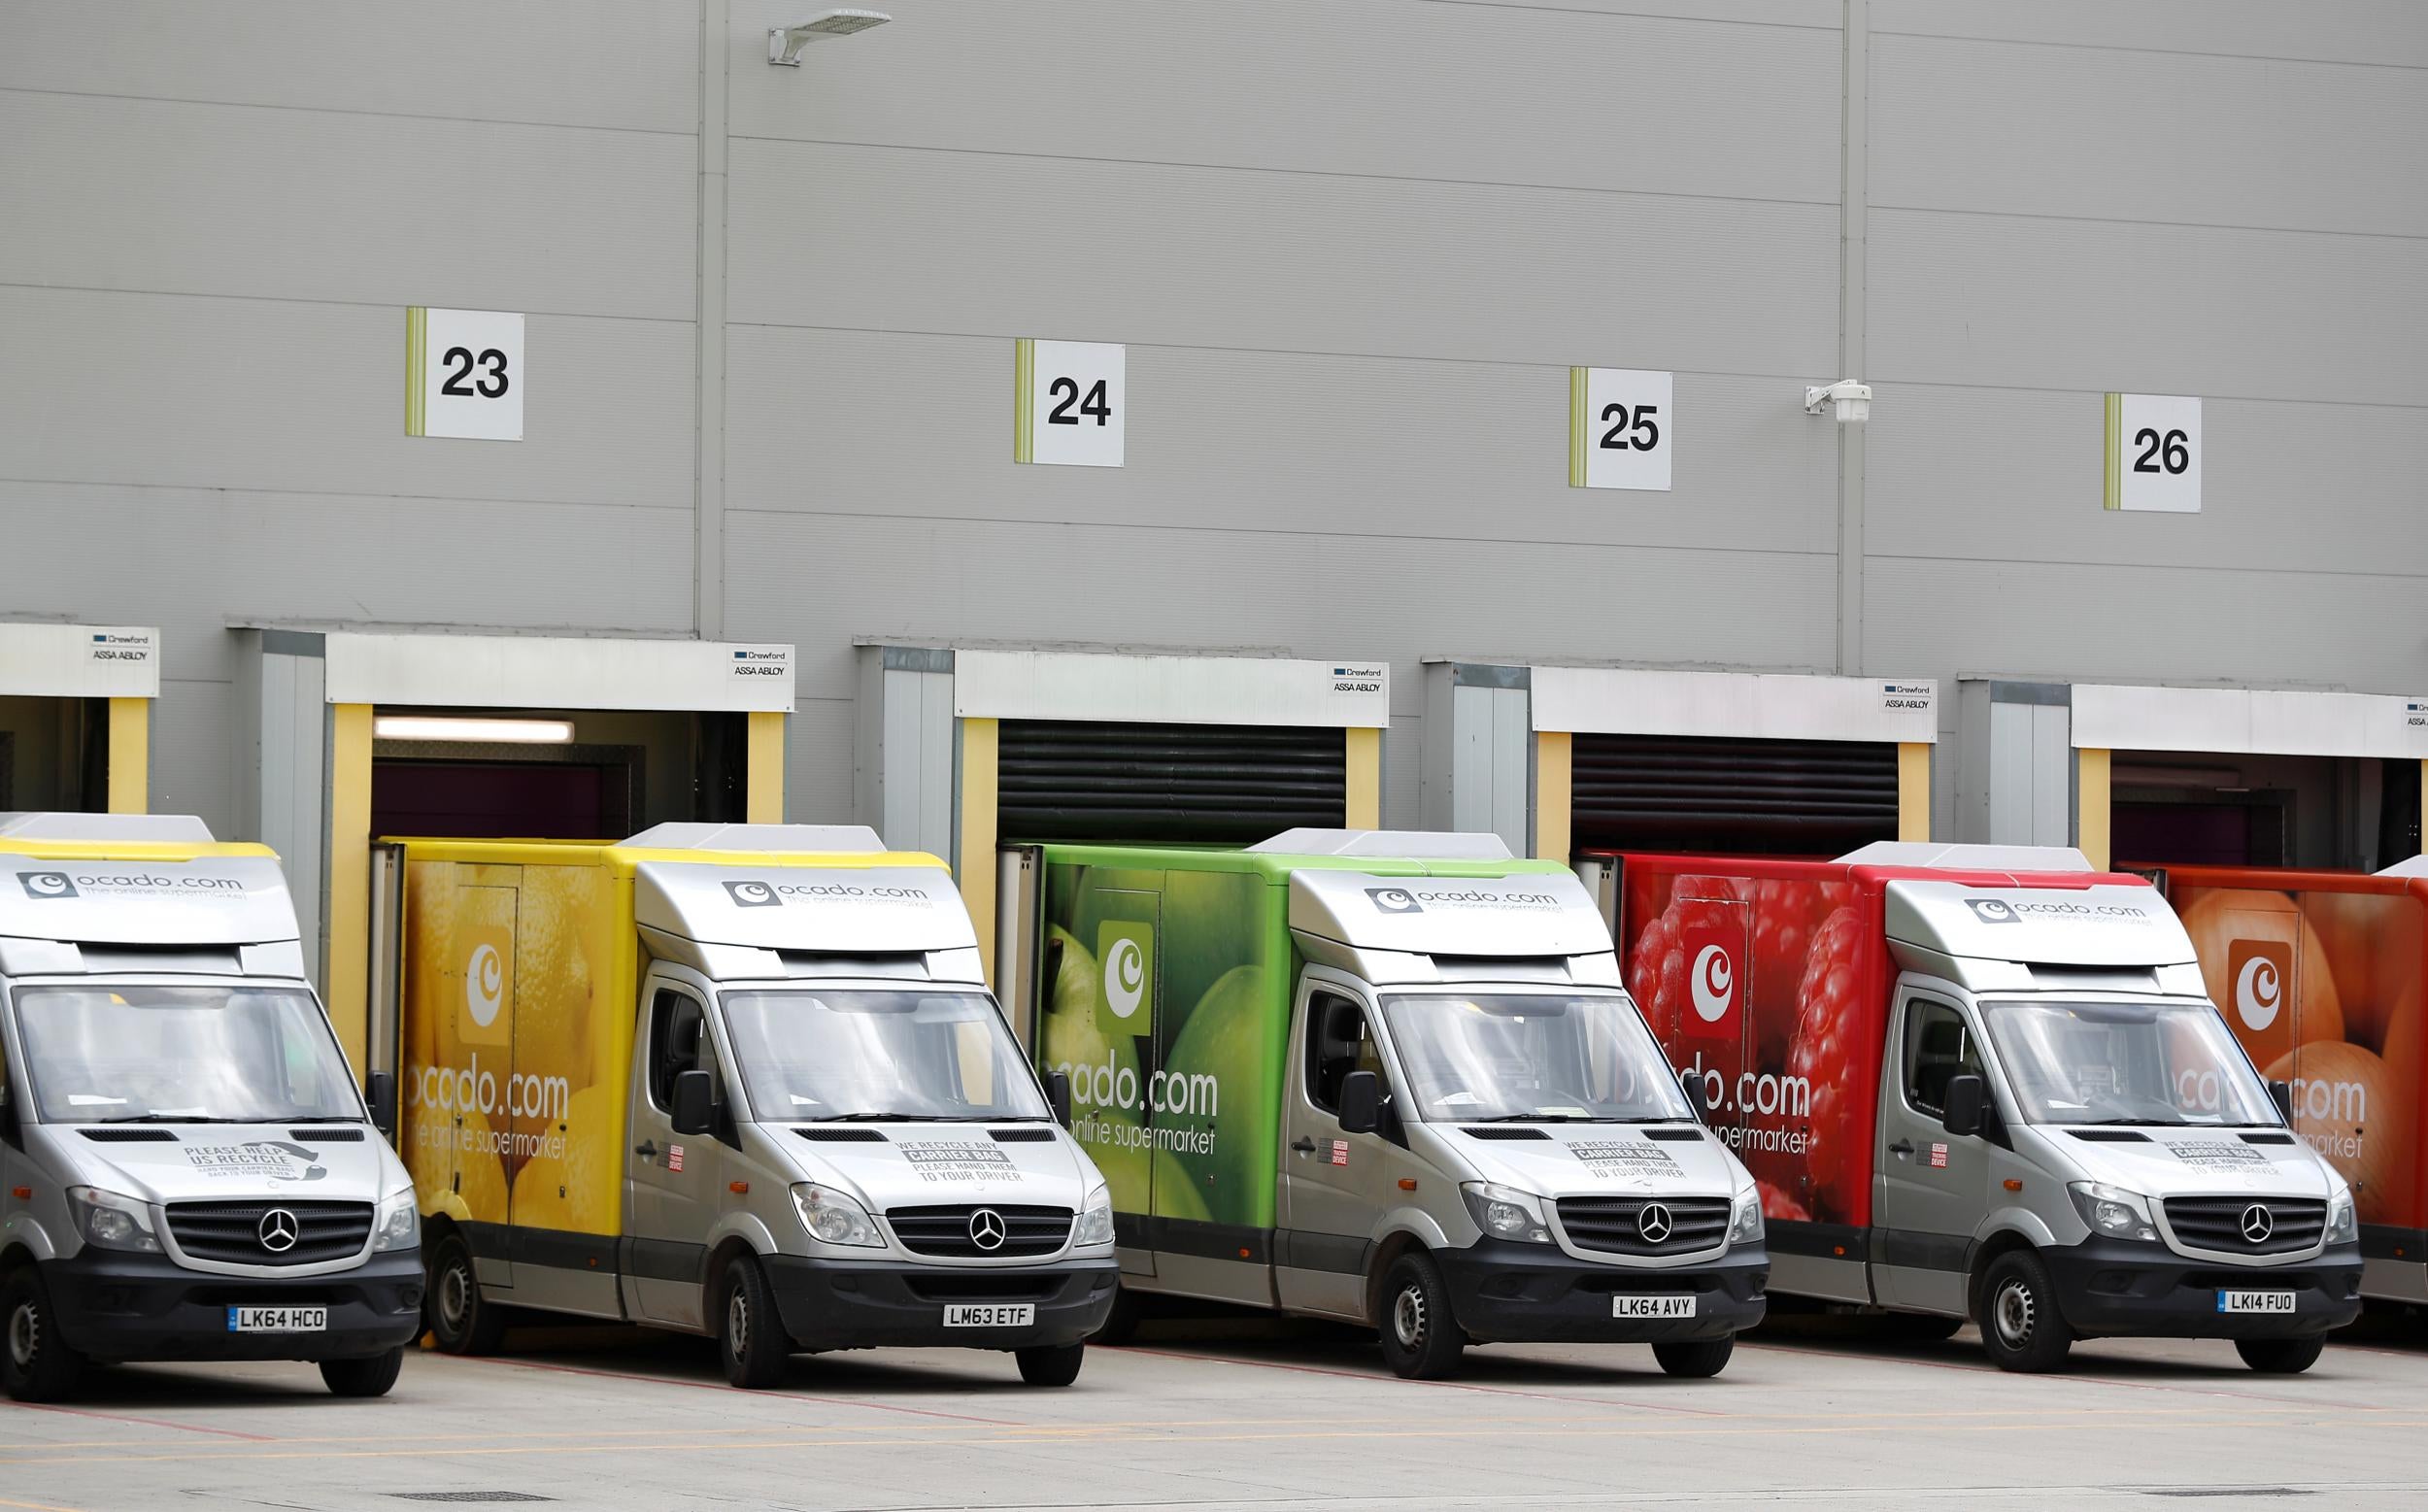 Ocado’s deal with Kroger has driven it into the FTSE 100